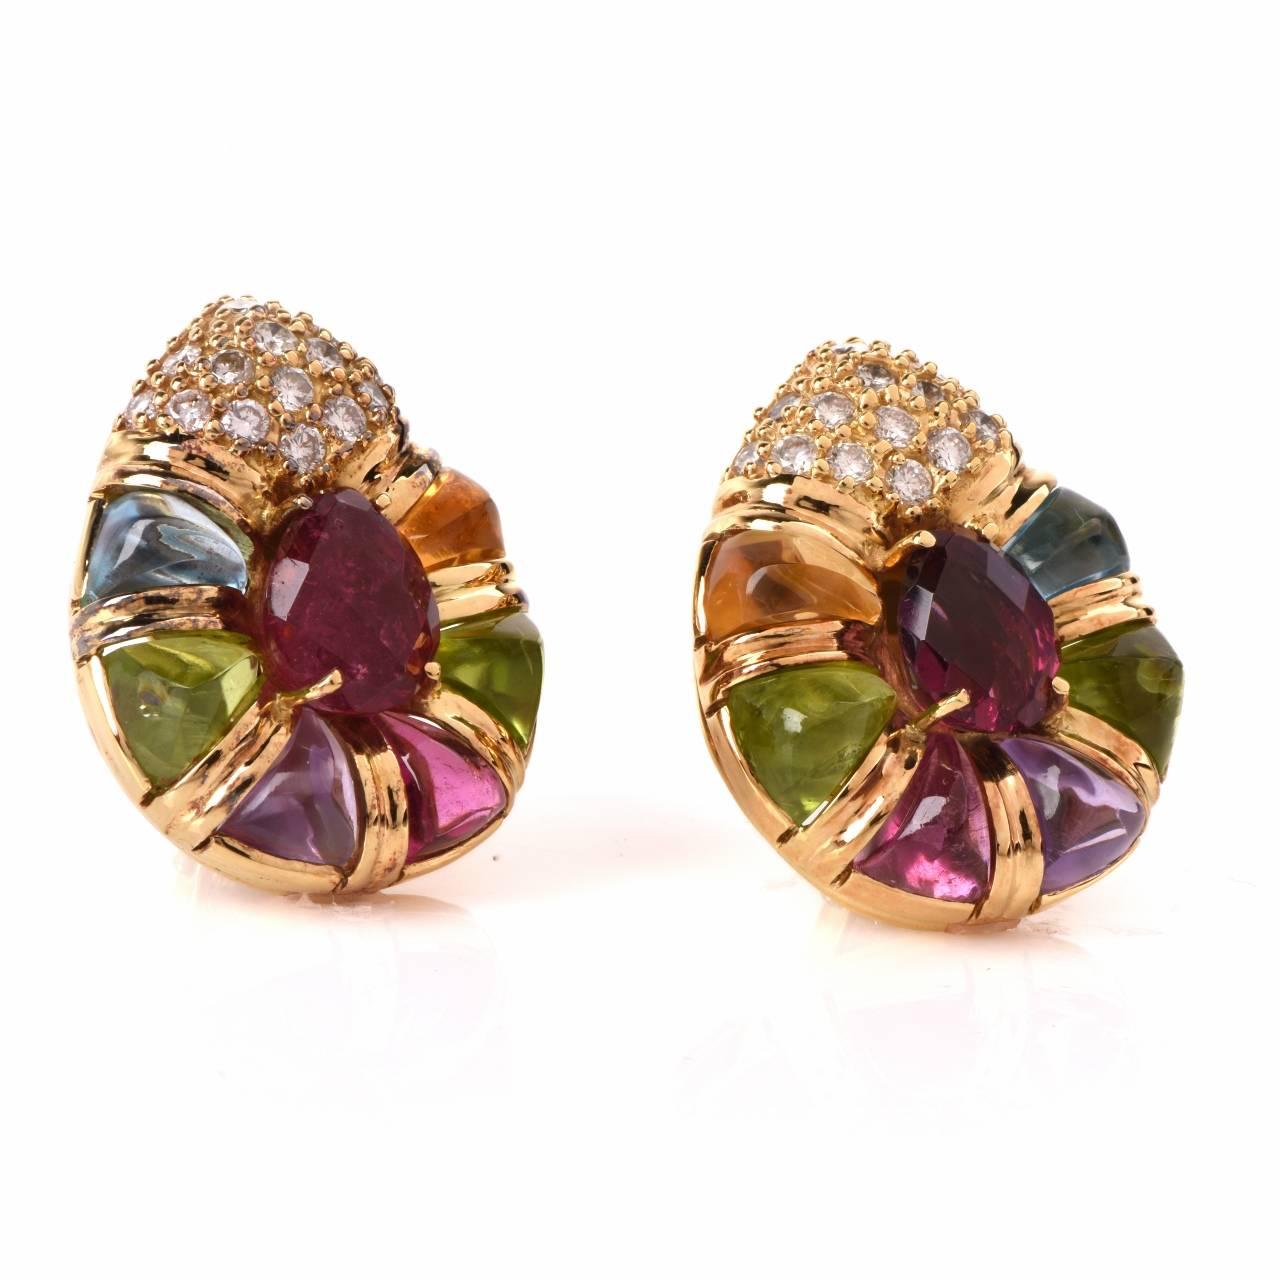 These vividly colored clip-back earrings signed 